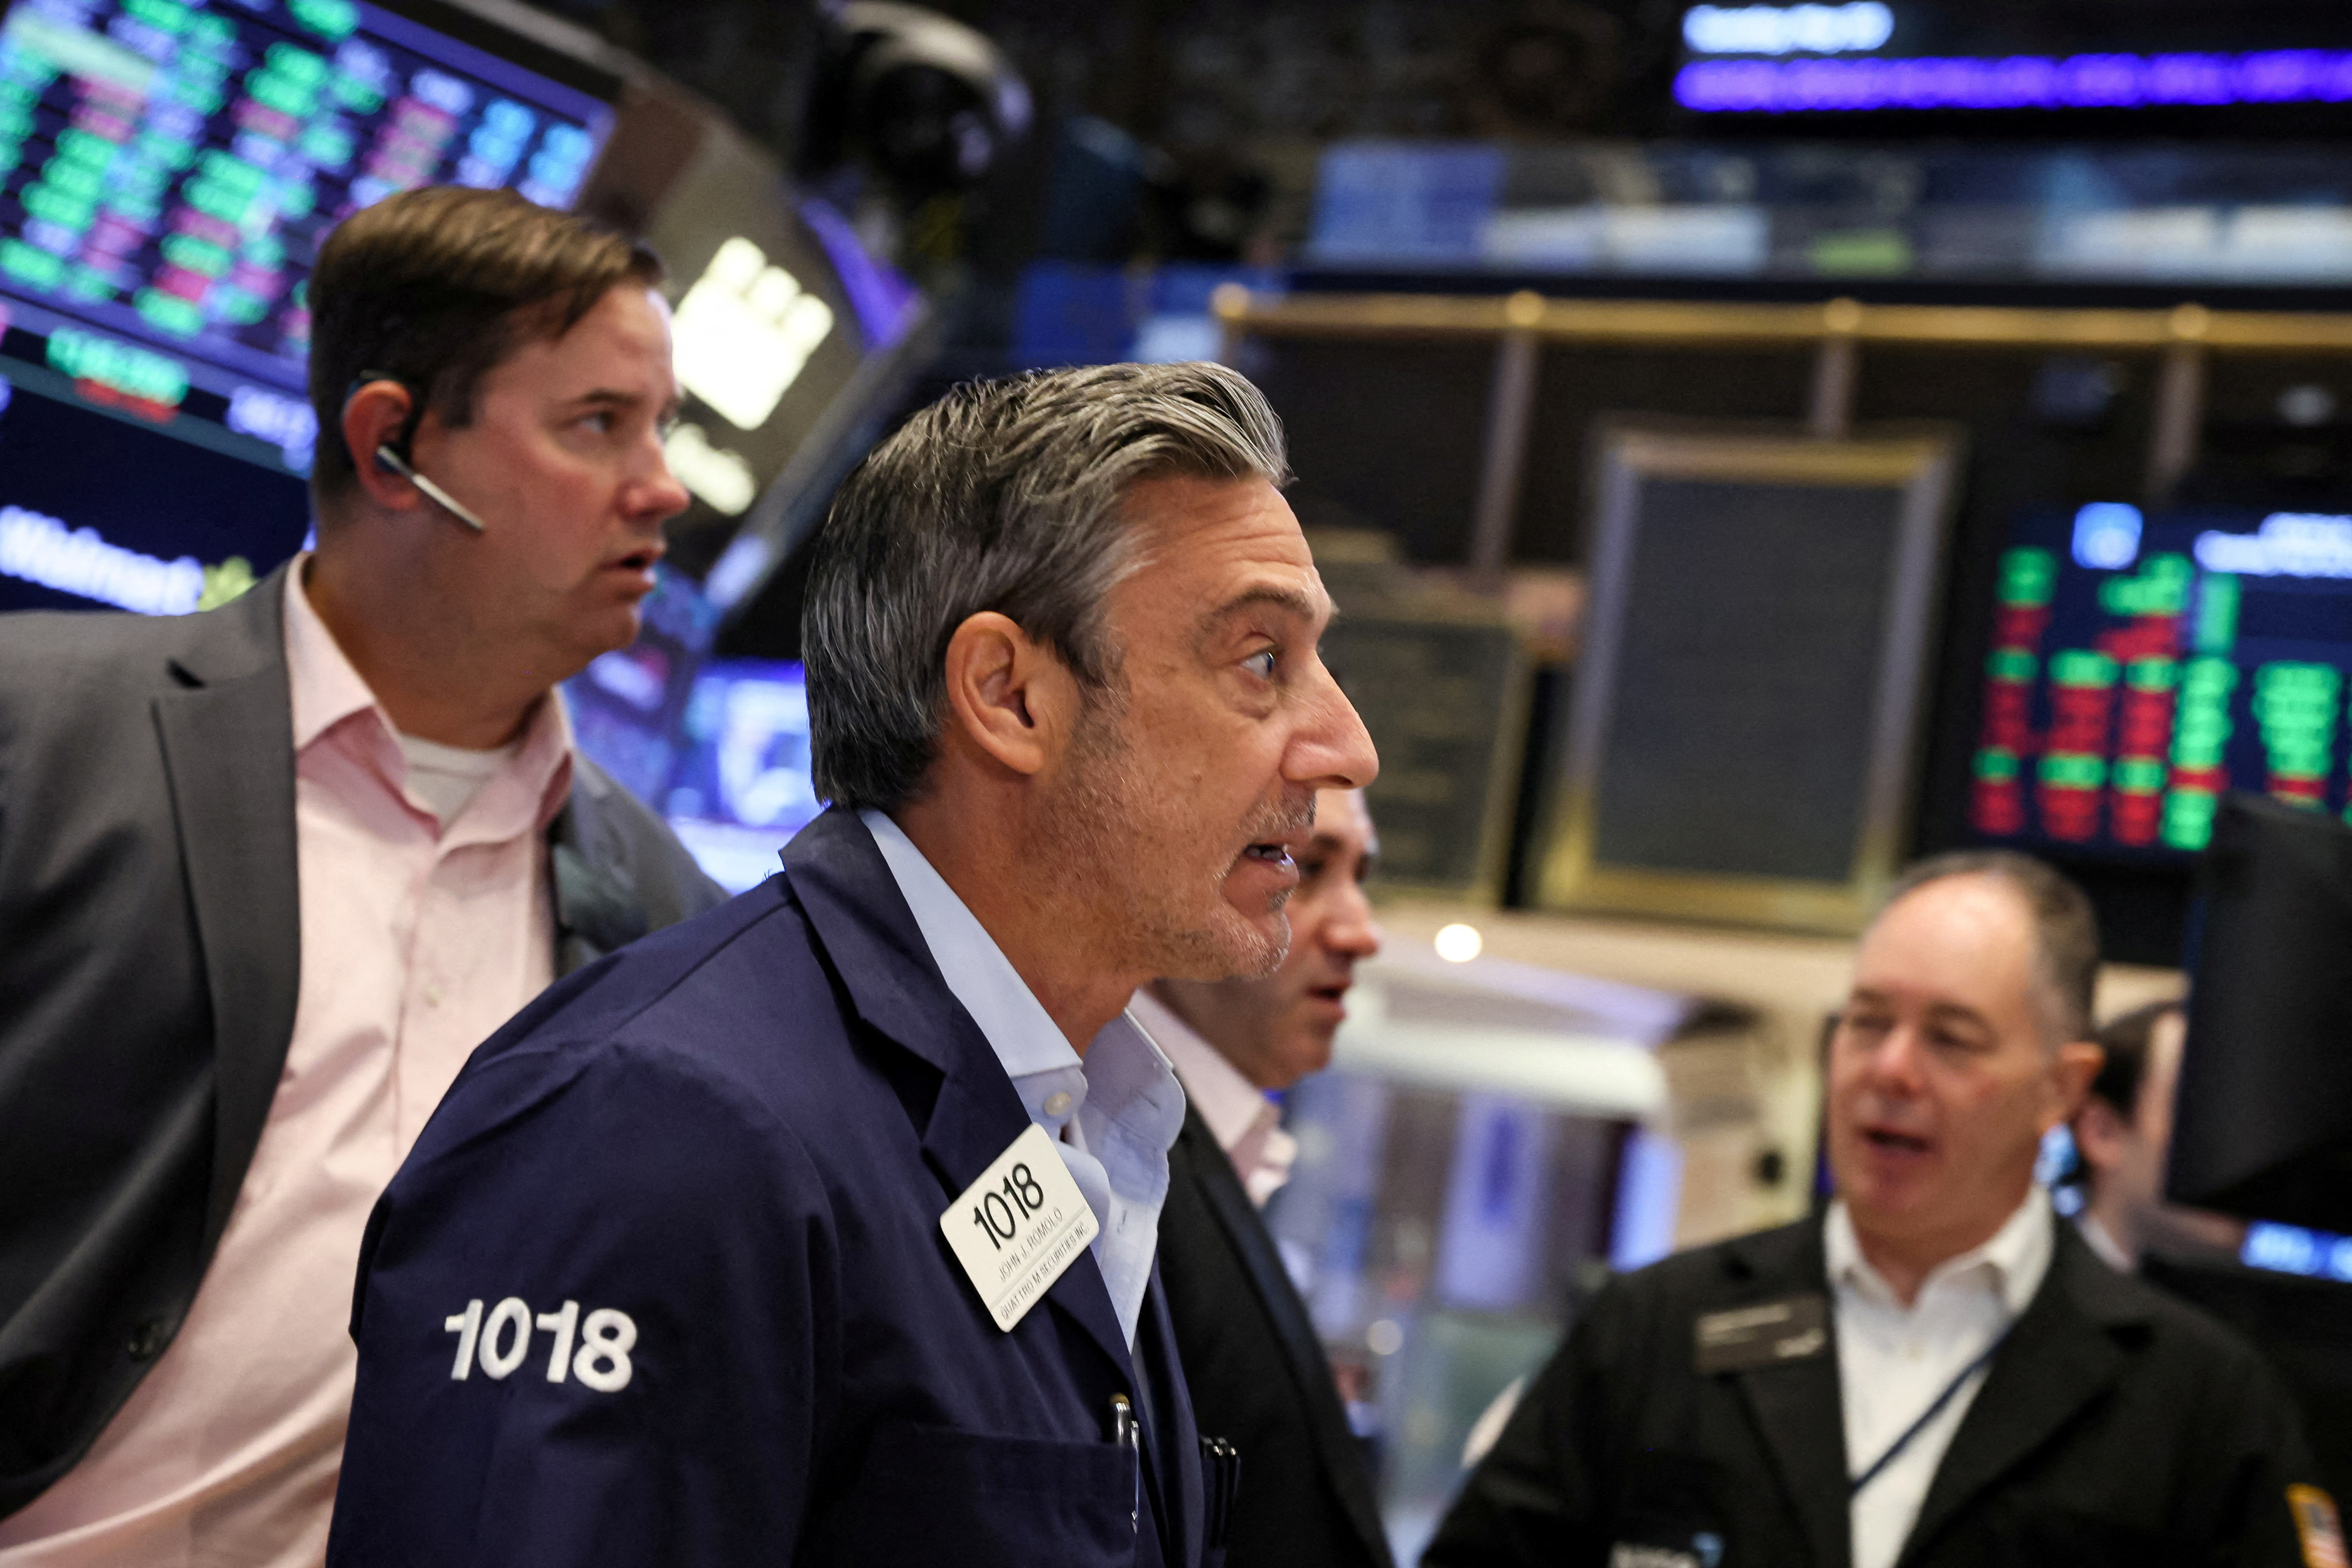 Wall Street ends higher as Powell ends testimony